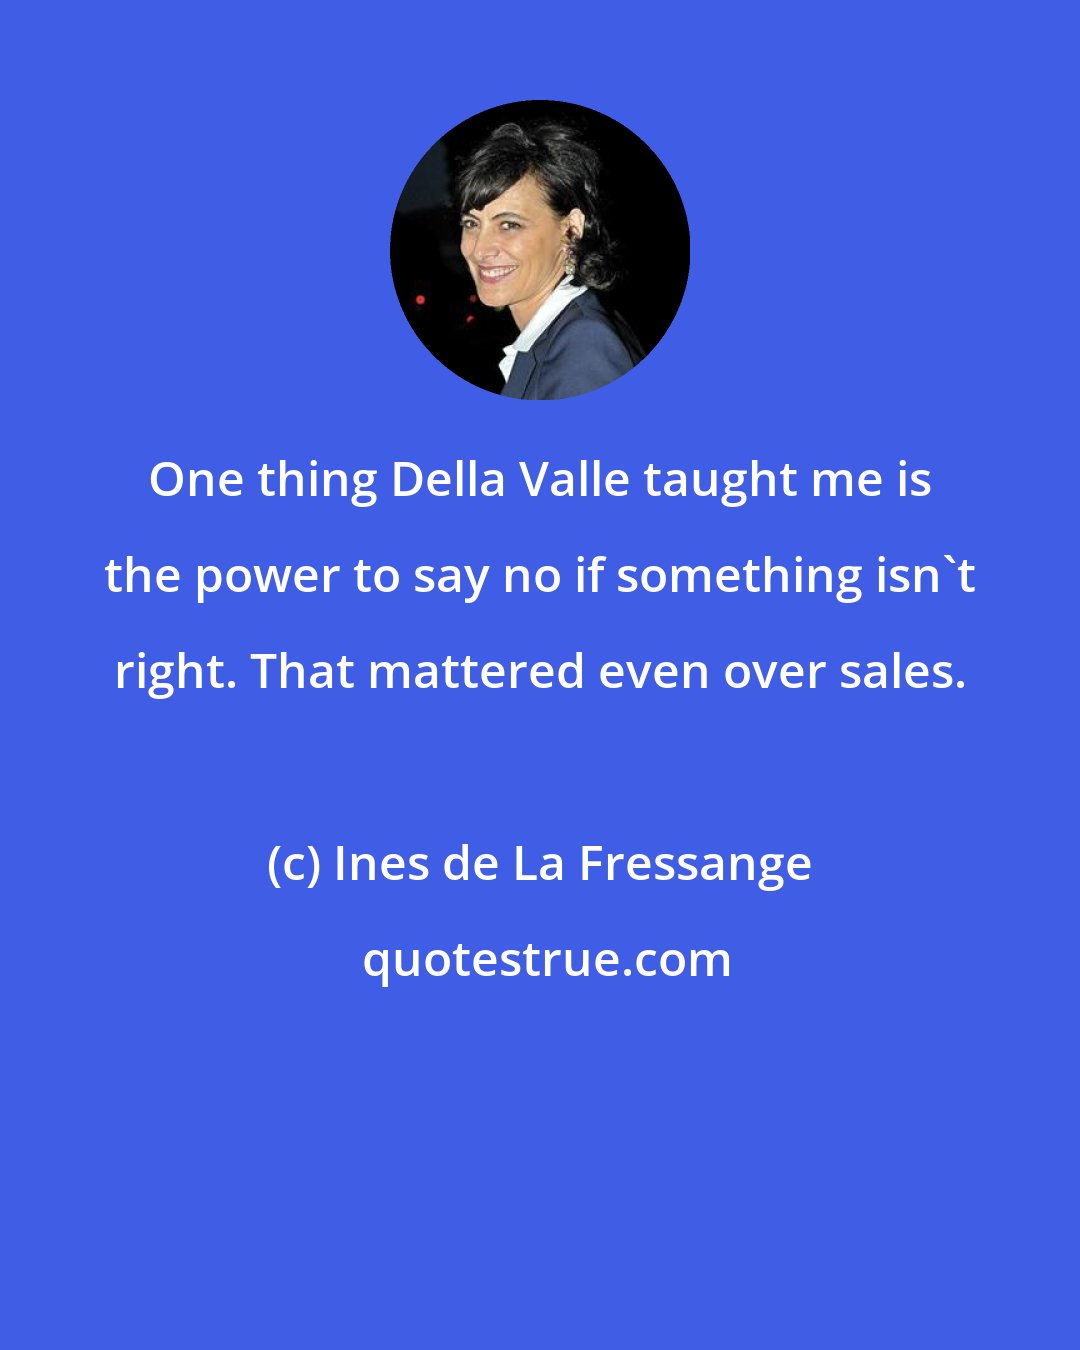 Ines de La Fressange: One thing Della Valle taught me is the power to say no if something isn't right. That mattered even over sales.